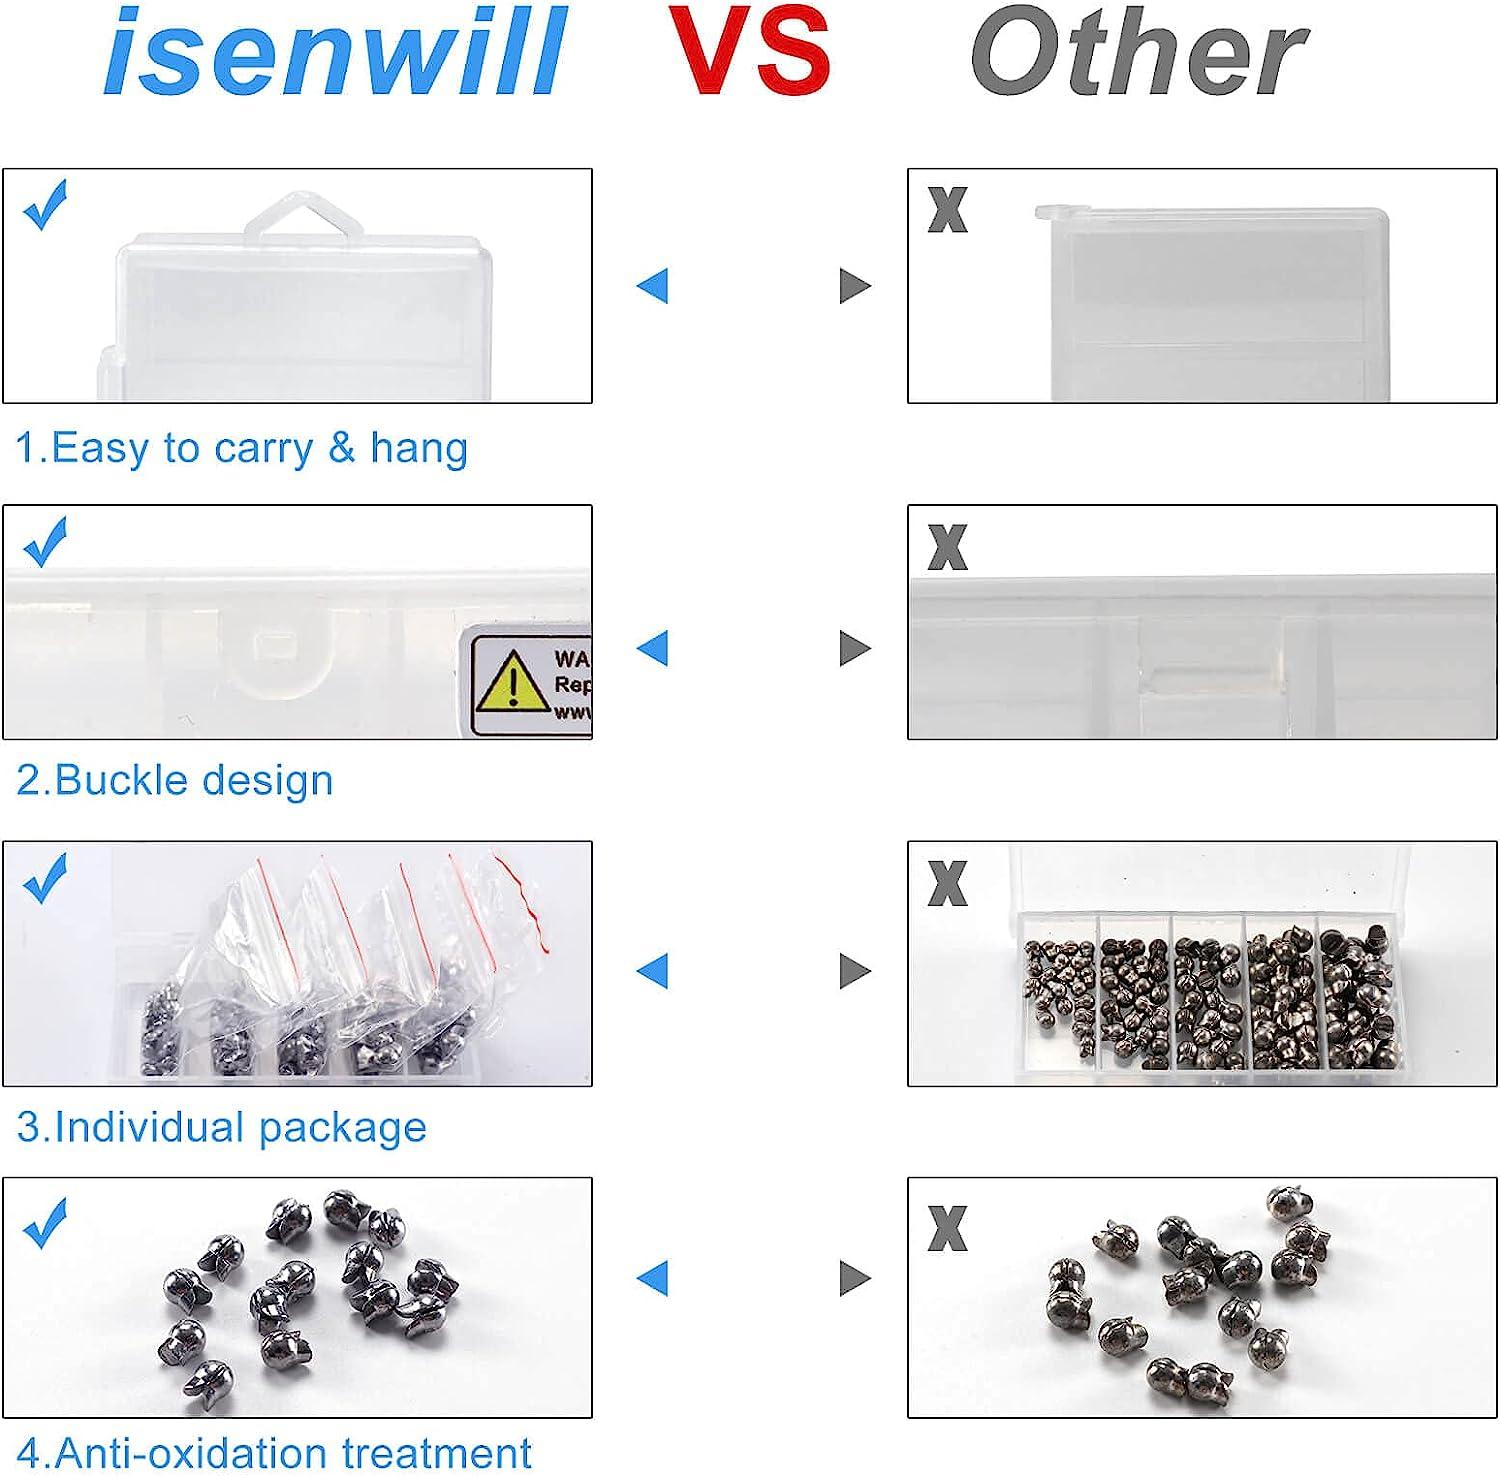 isenwill 100Pcs Fishing Weights & Sinkers, Round Split Shot Sinker, Removable  Split Shot Sinker Weights, Fishing Lead Egg Sinkers 5 Sizes, 0.007 oz,  0.017 oz, 0.035 oz, 0.053 oz, 0.07 oz Double Open